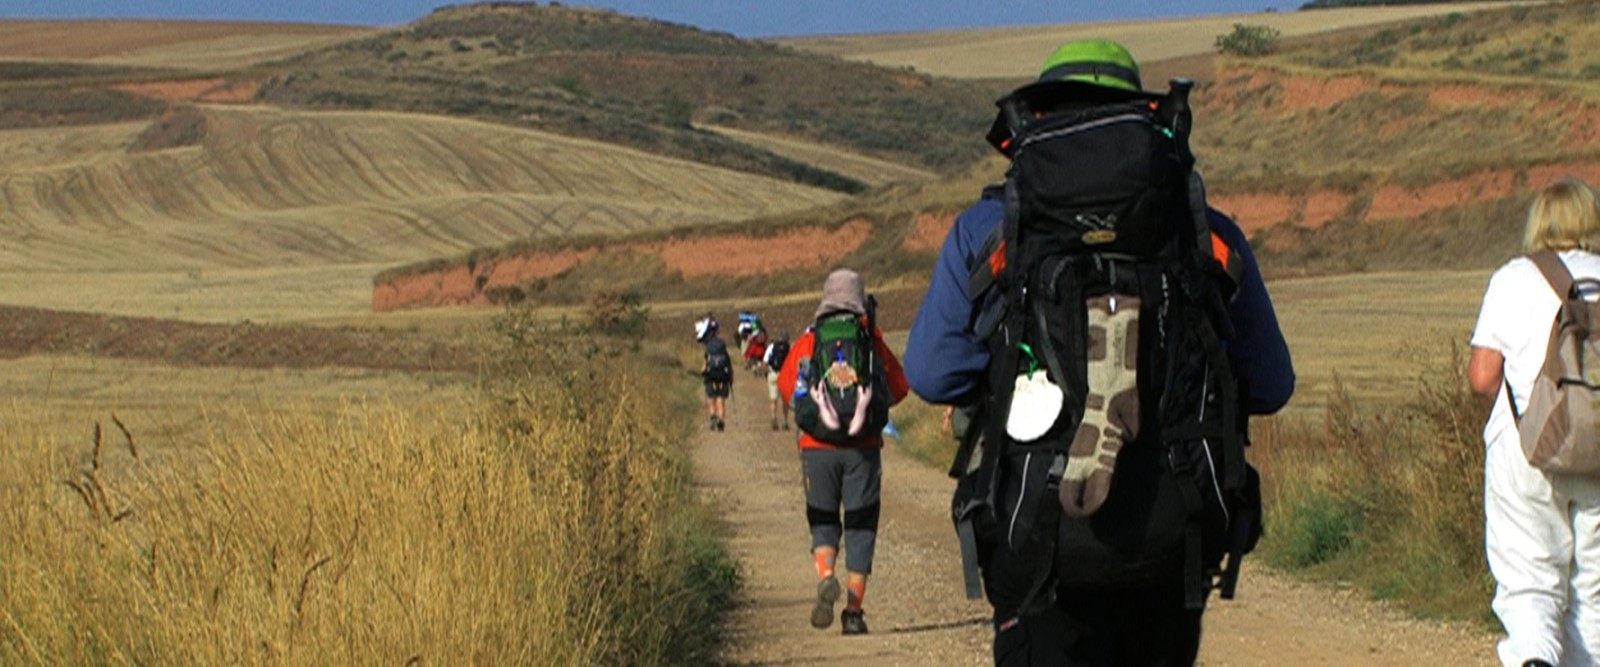 Common Roads - Pilgrimage and Backpacking in the 21st Century